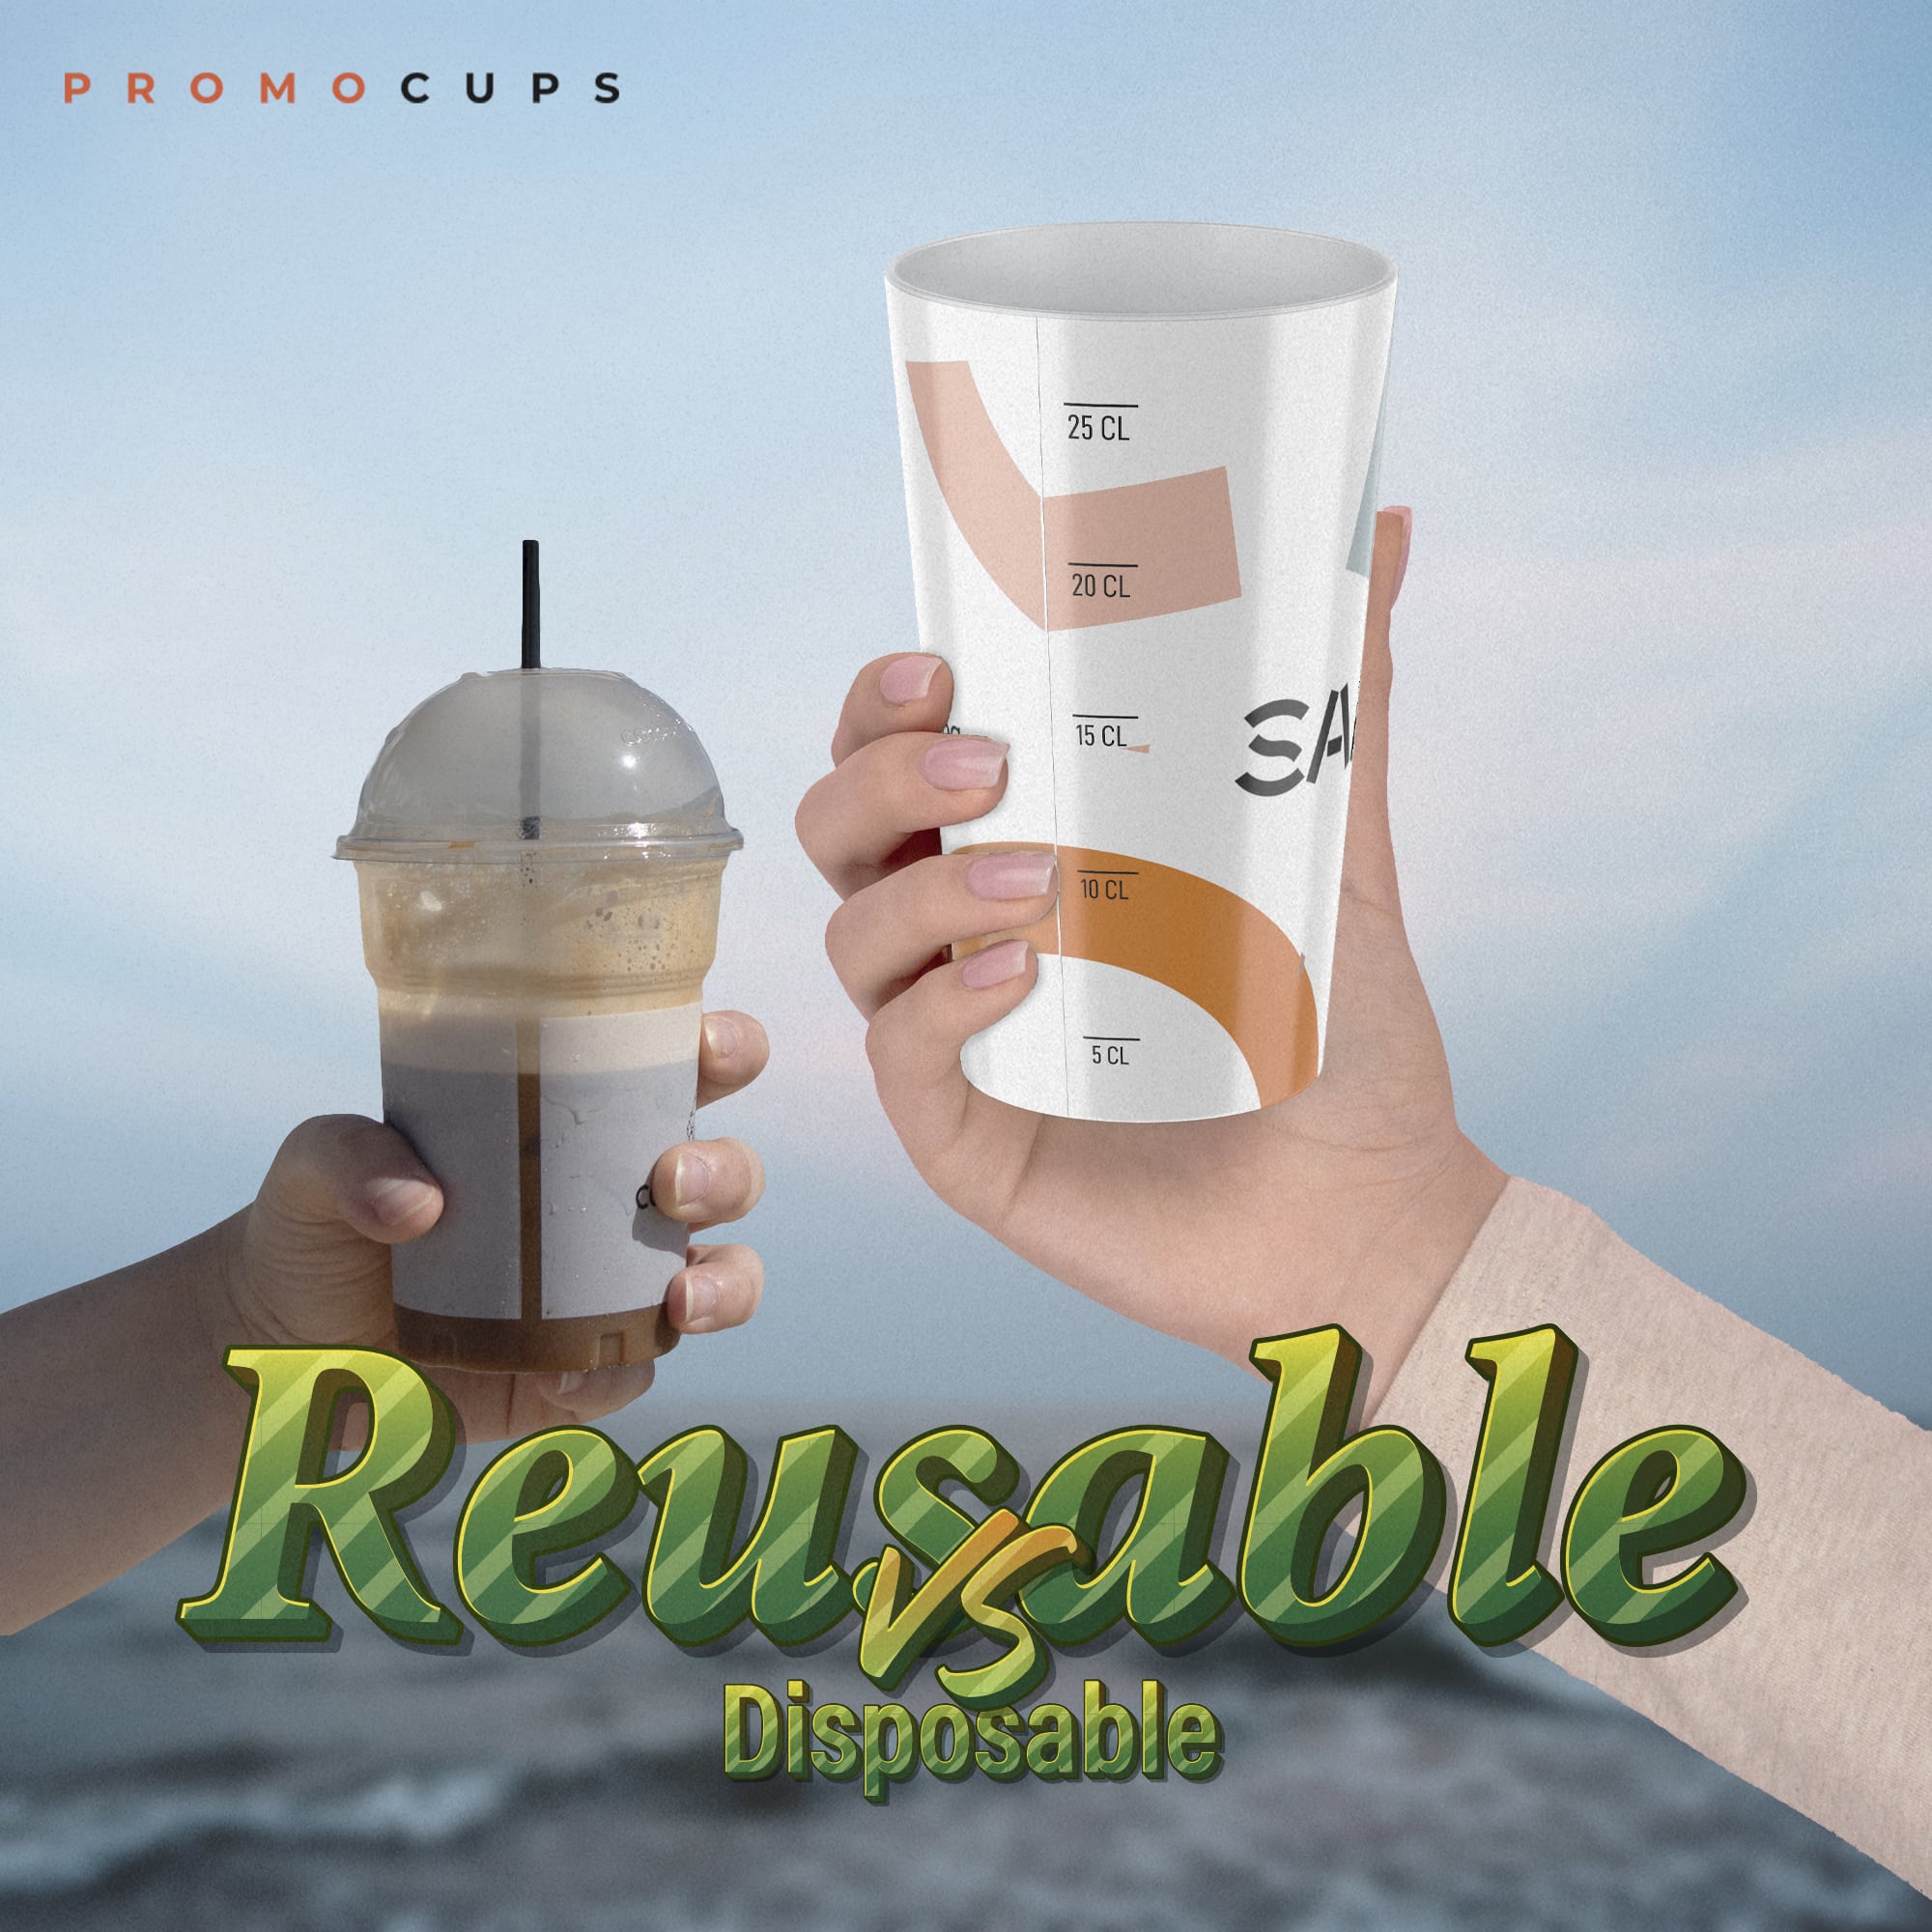 Reusable cups vs. disposable cups: The benefits of reusable cups